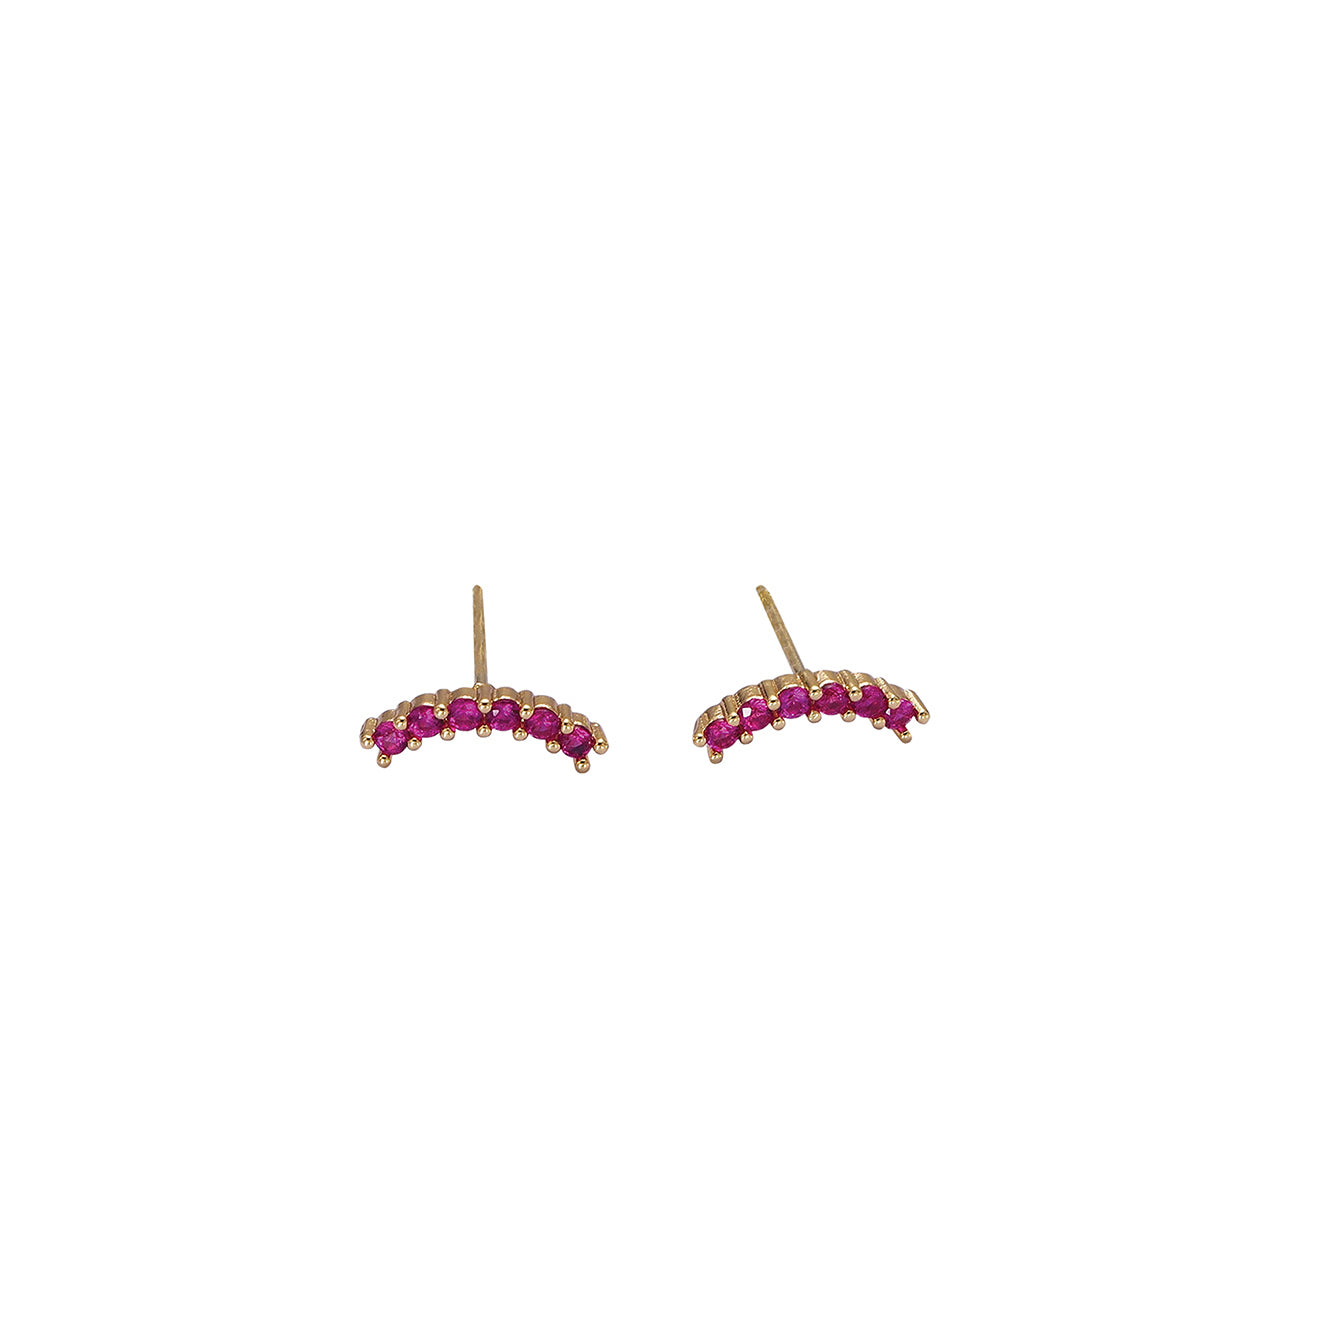 Gold and pink half-moon earrings